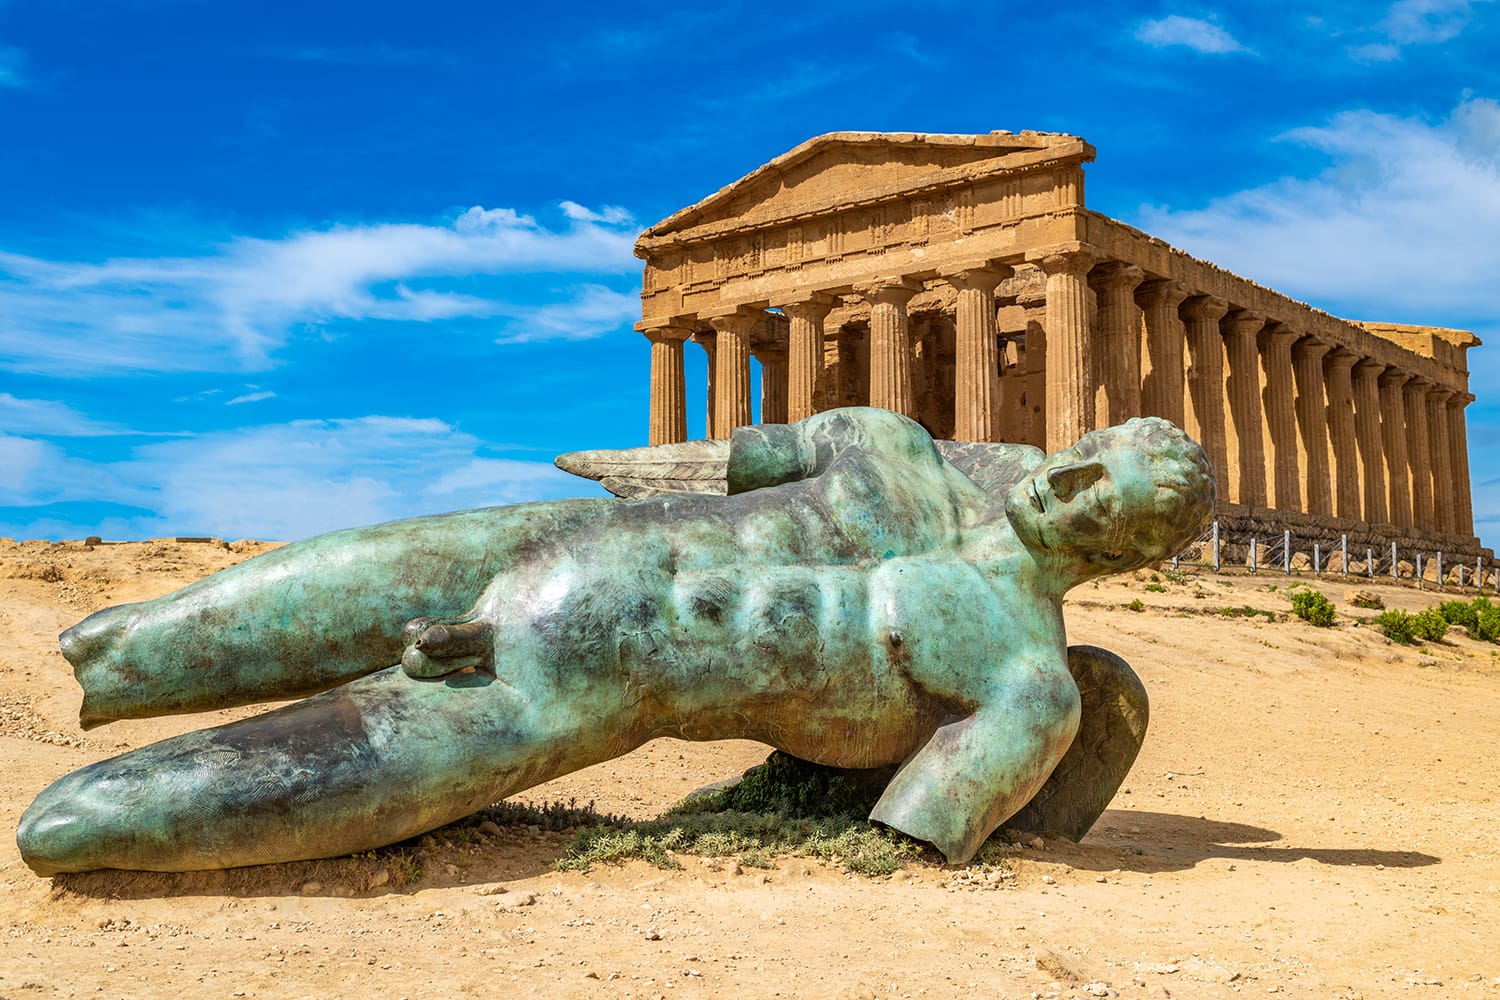 Temple of Concordia and the statue of Fallen Icarus, in the Valley of the Temples, Agrigento, Sicily, Italy